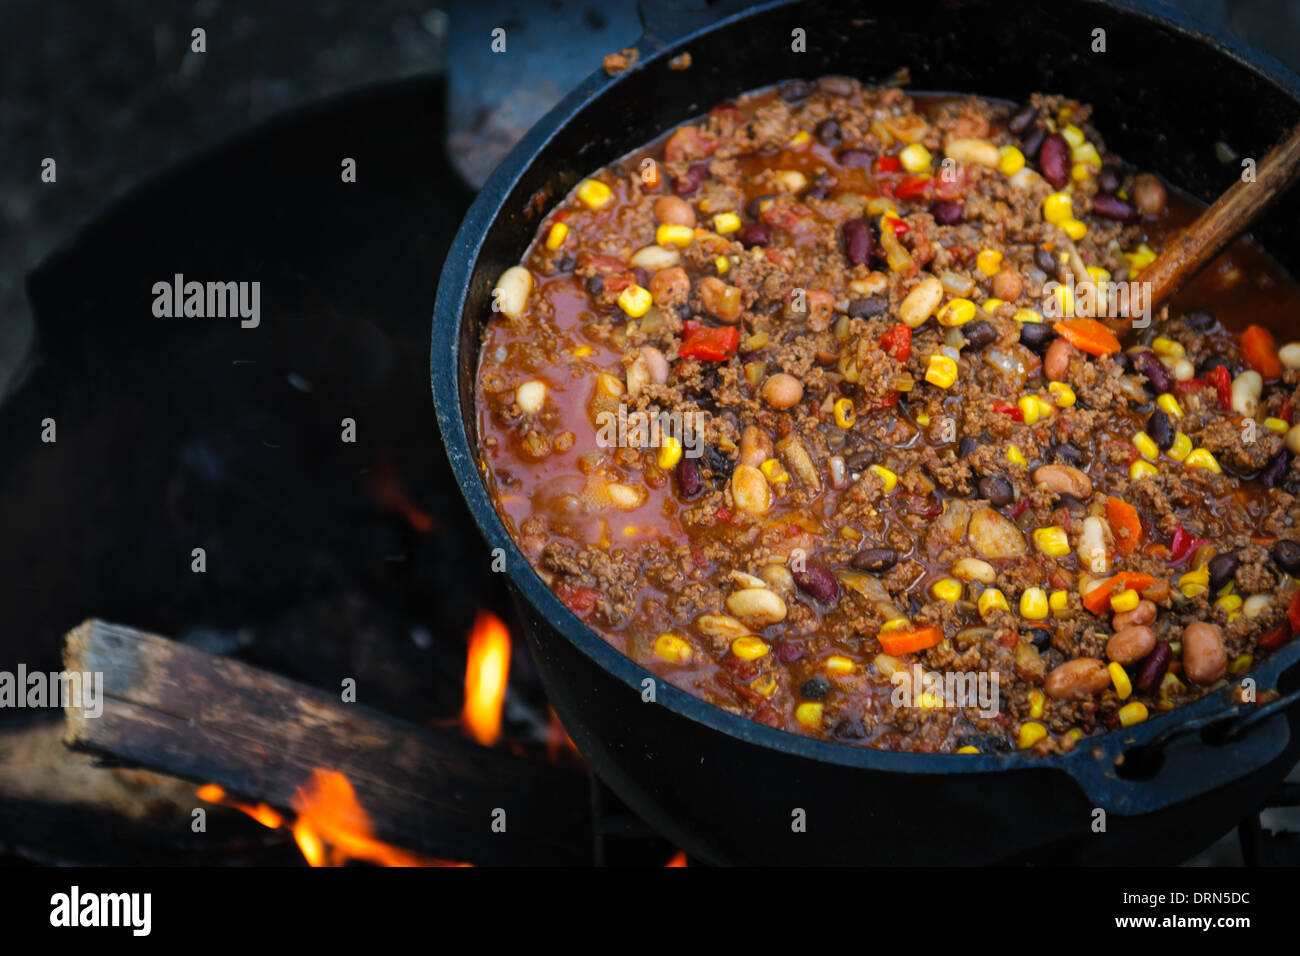 Large cast iron pot of spicy chili cooking over a campfire Stock Photo ...